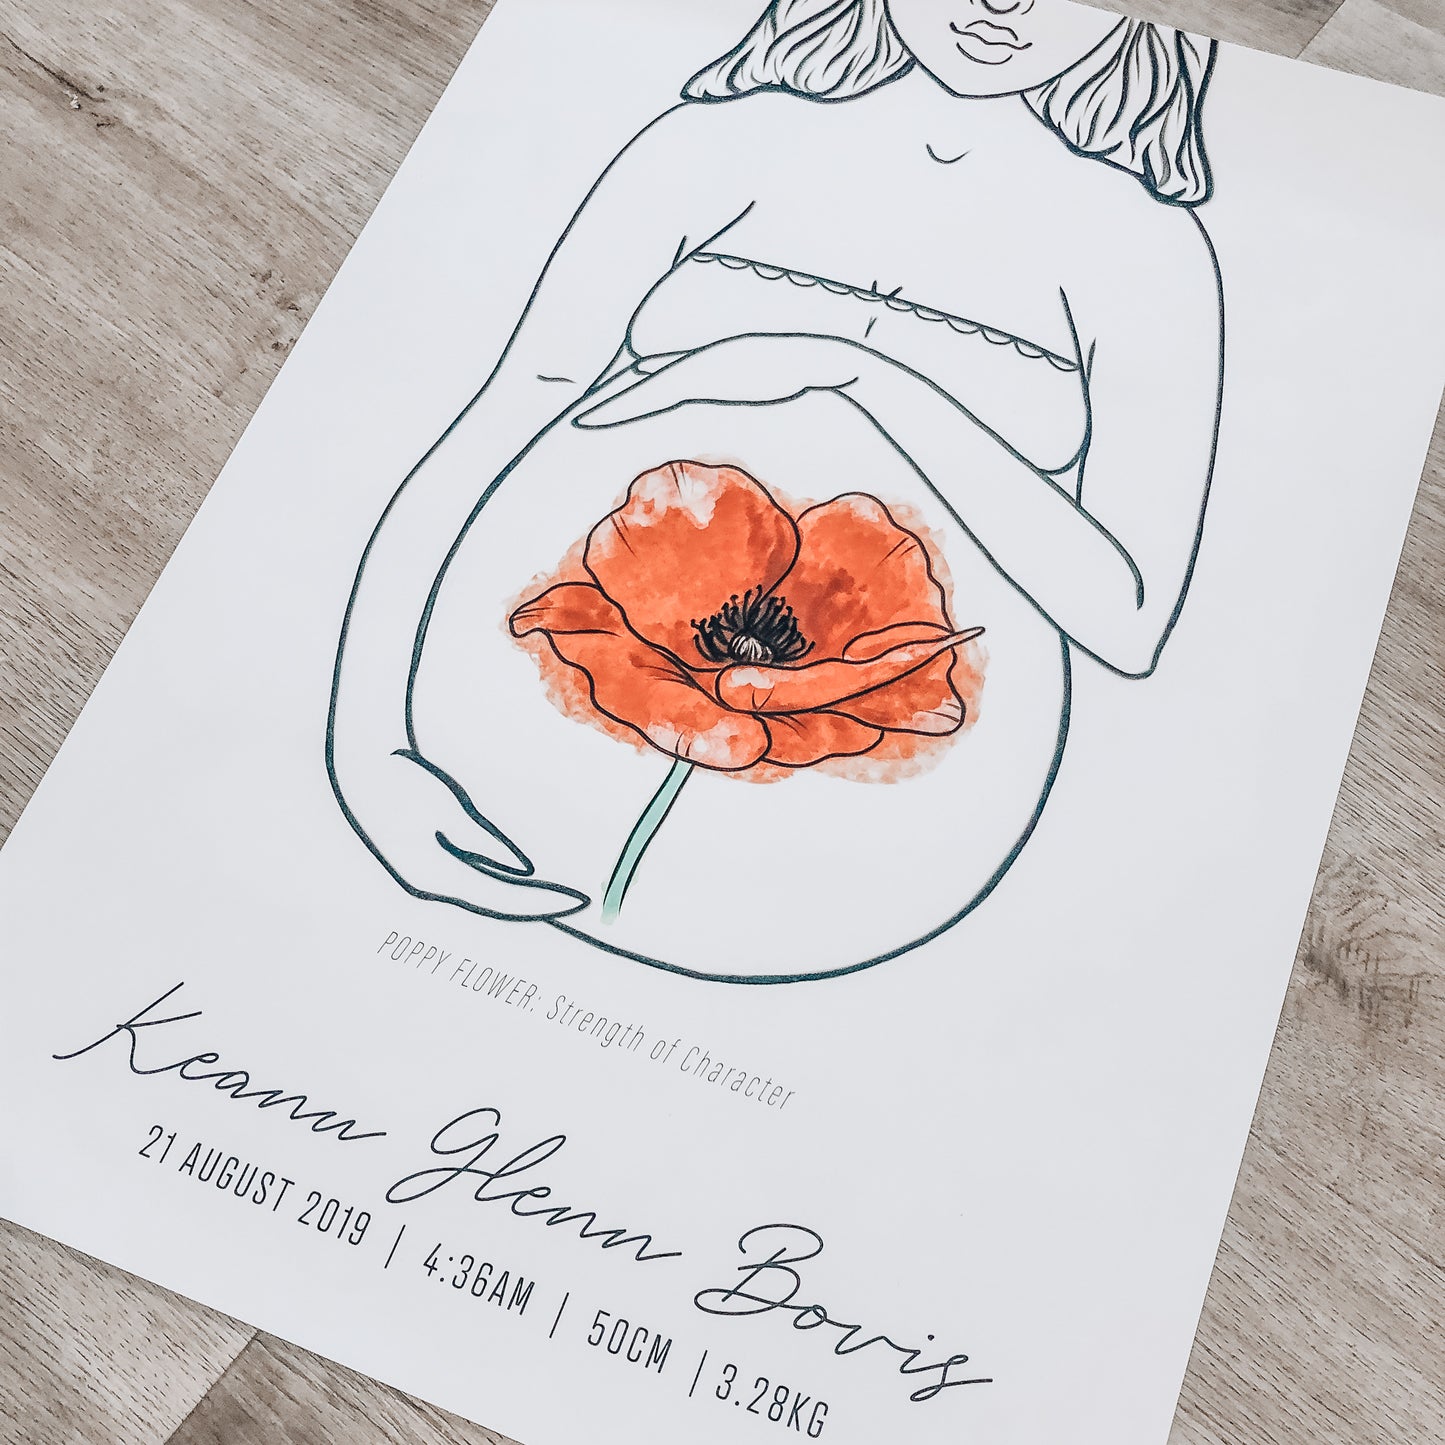 'Mother of Life' - Birth Flower Poster (Modest) - Mae She Reign - Creative Studio